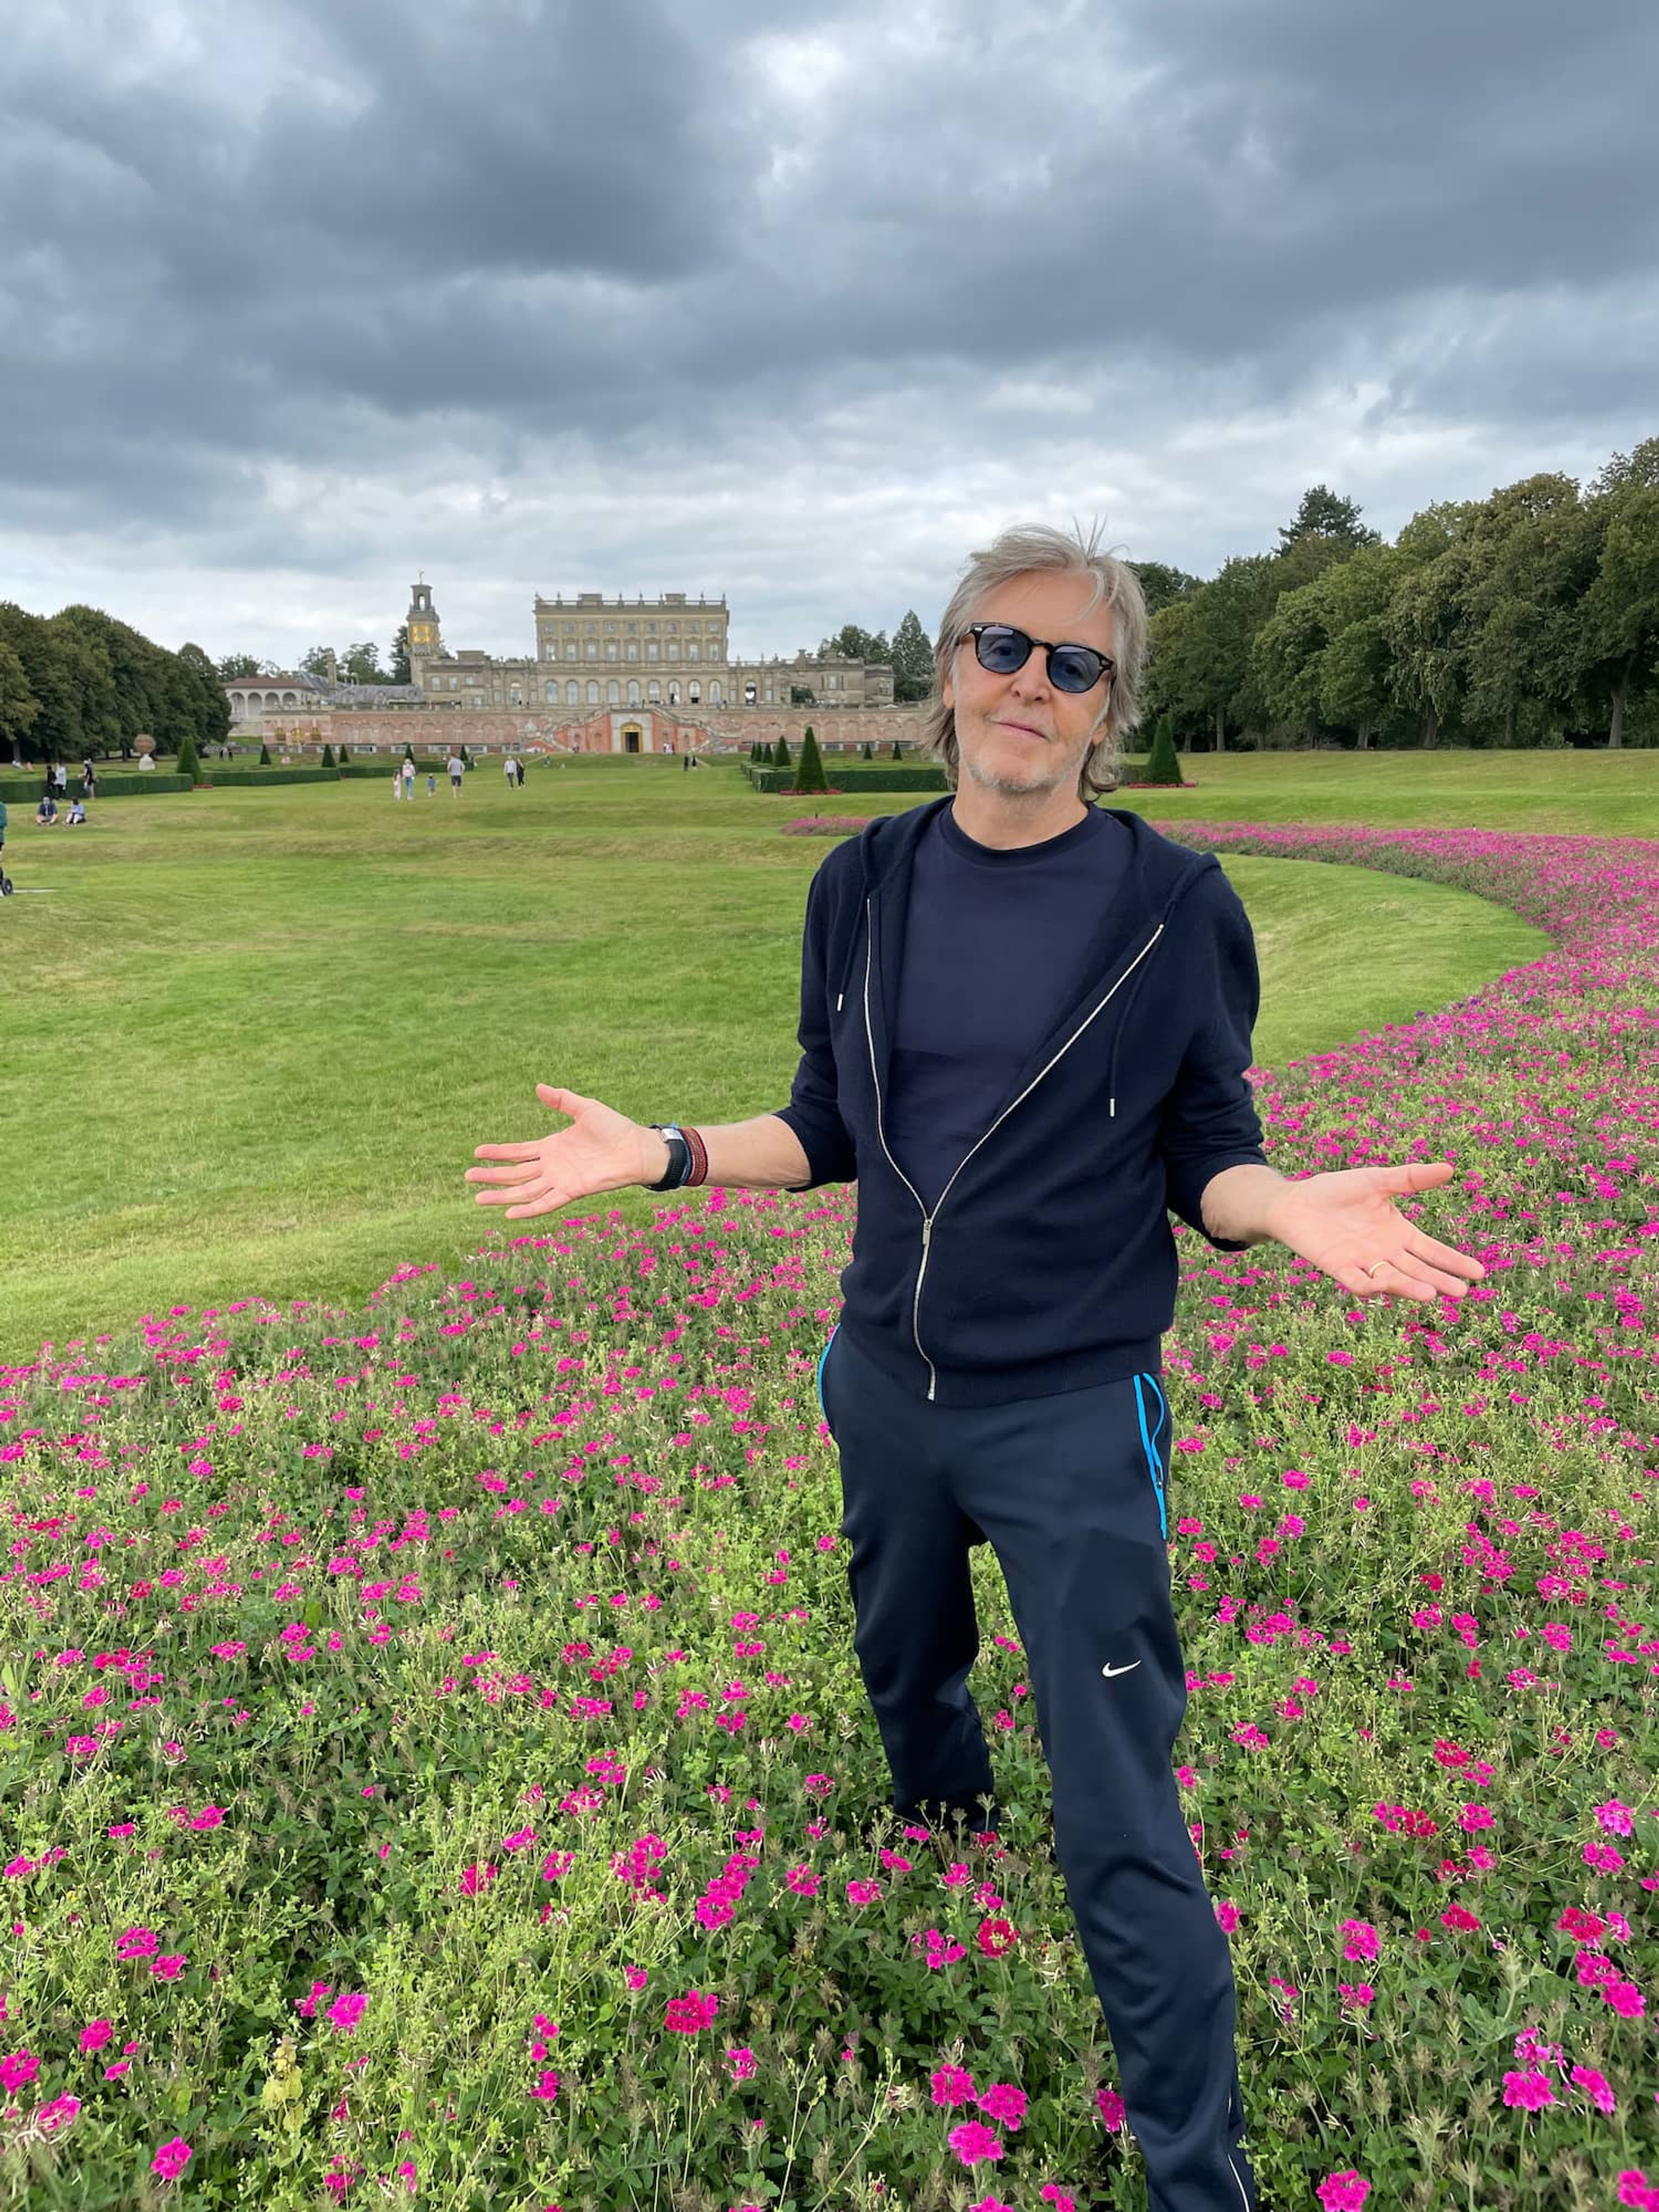 iPhone photograph of Paul McCartney posing in-front of a stately home